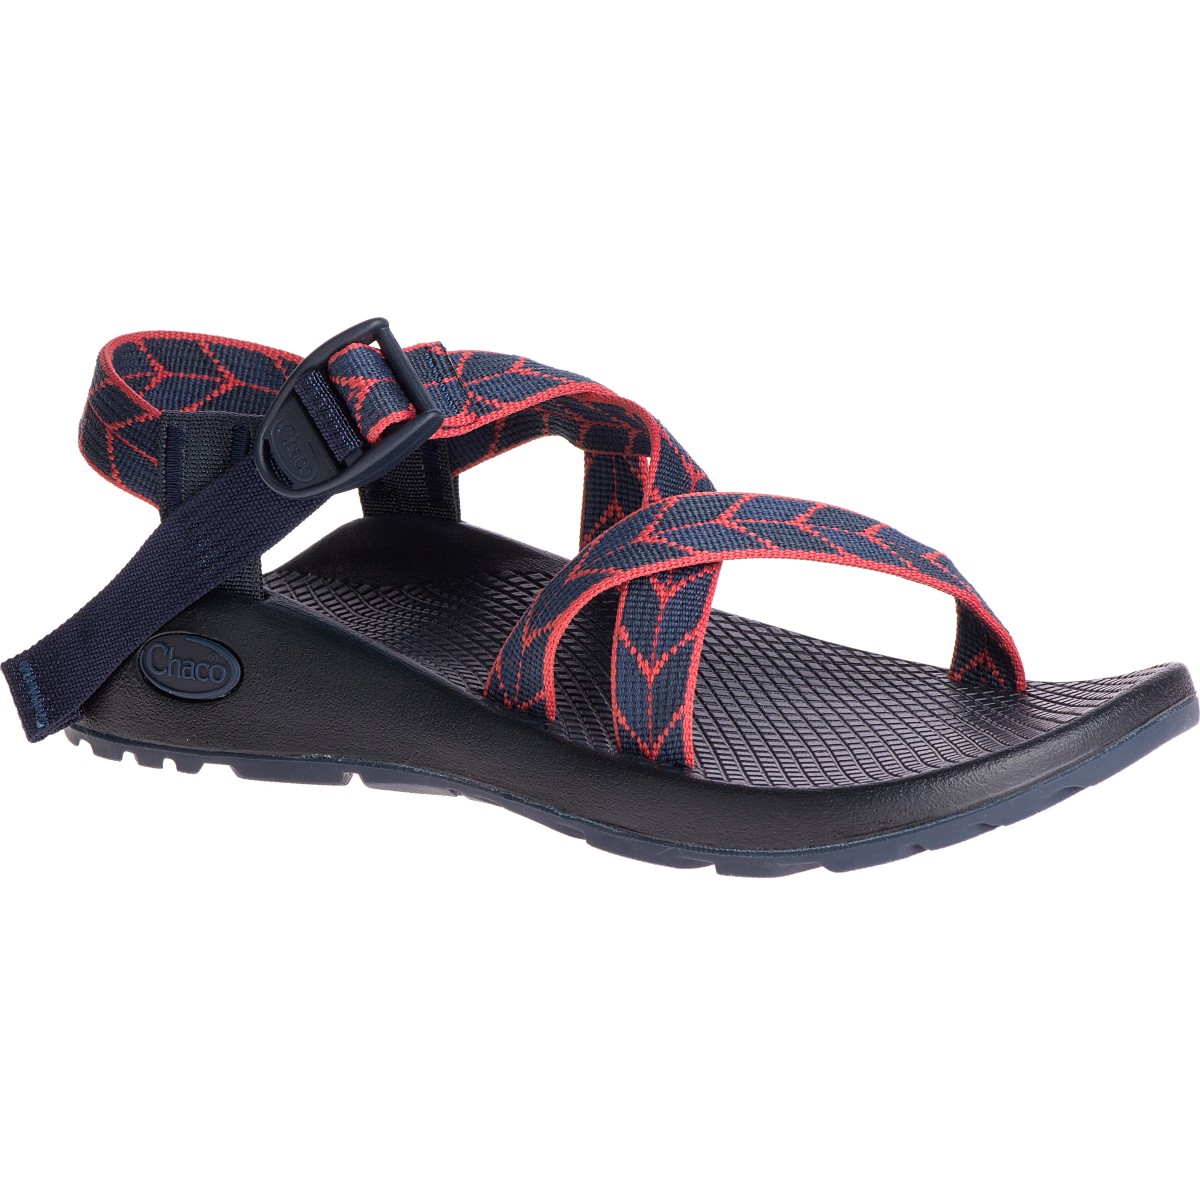 Chaco Z1 Classic Sandal - Women's , Up 